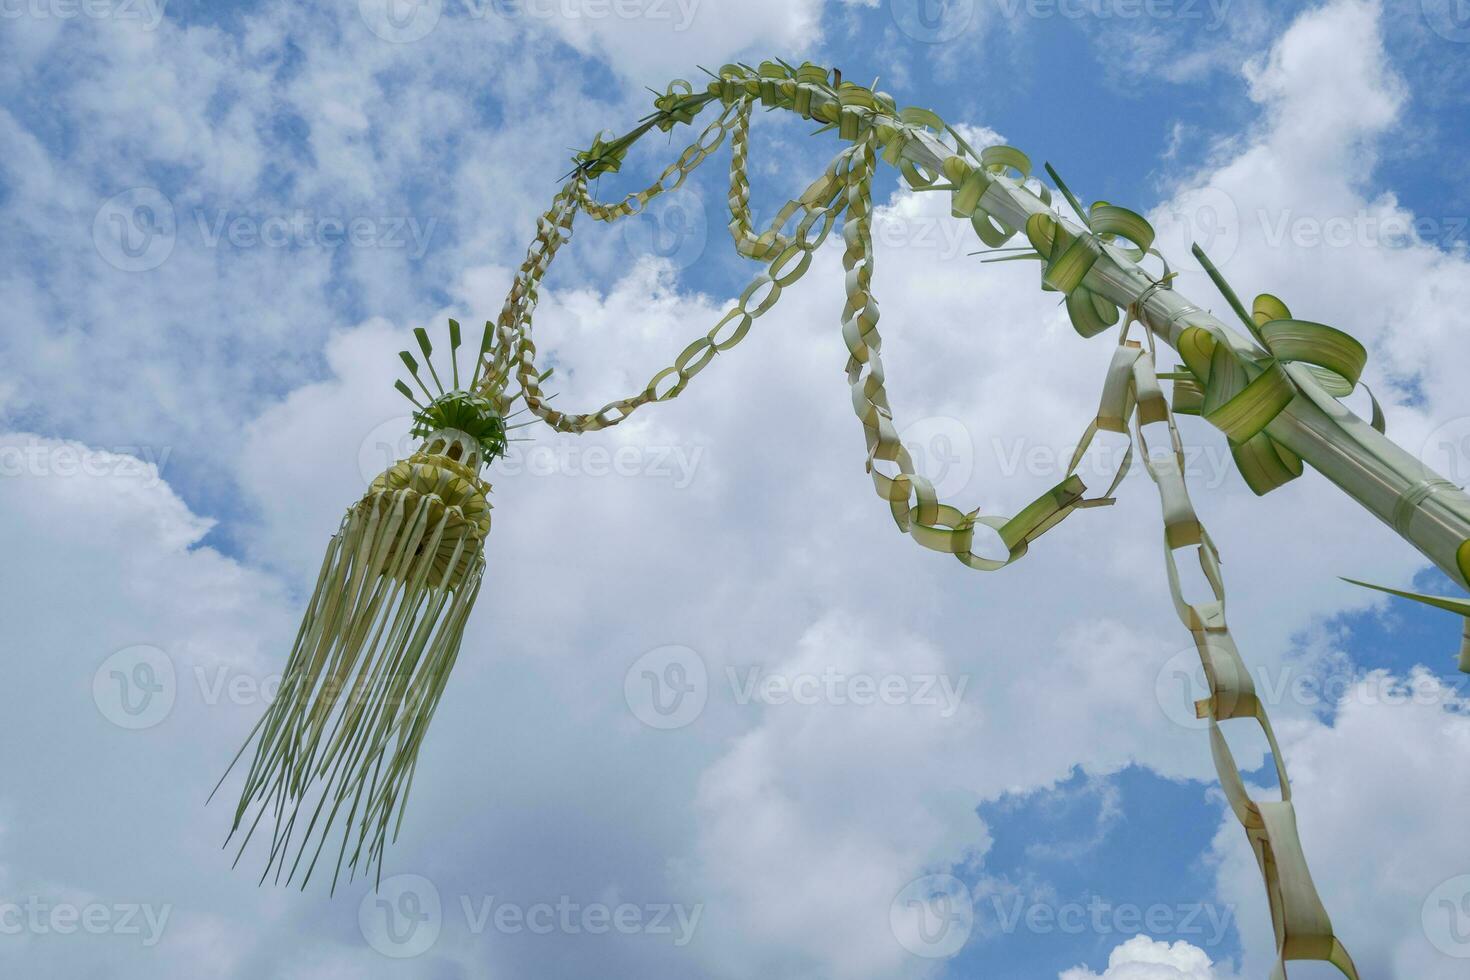 a traditional artwork from Indonesia made from young yellow coconut leaves called janur kuning, commonly used as a sign of a wedding ceremony against the backdrop of a cloudy and beautiful sky photo